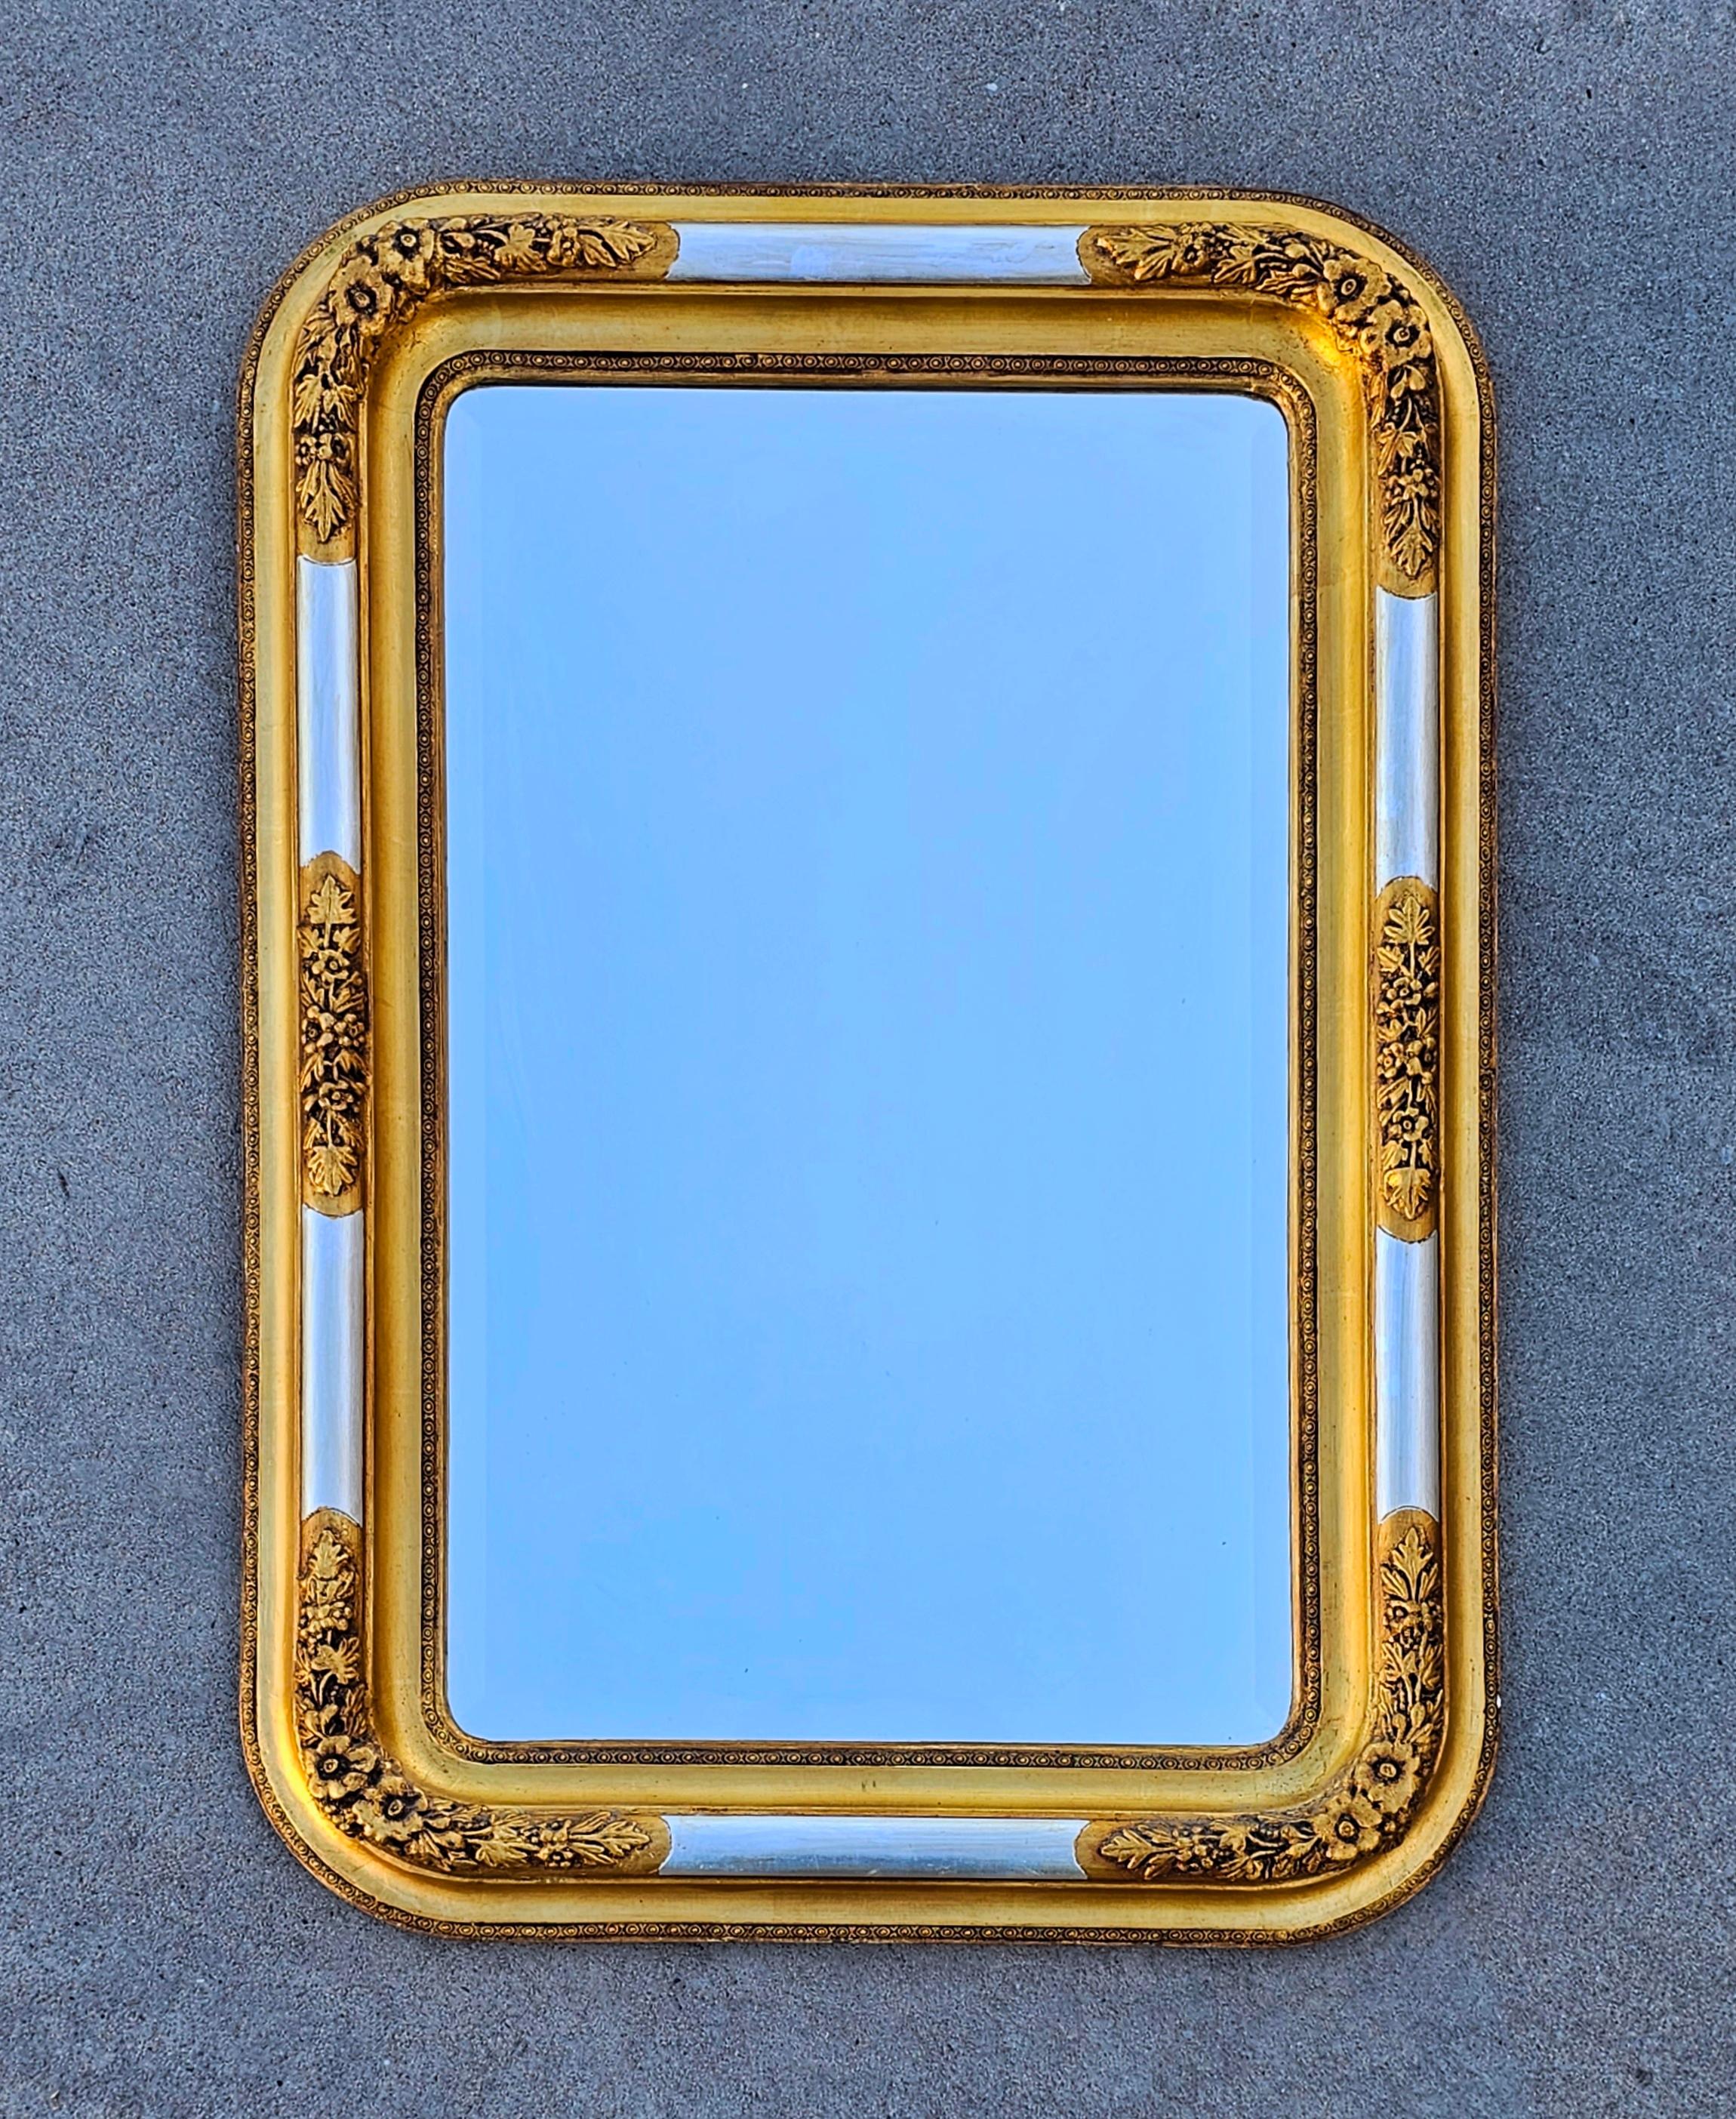 In this listing you will find a gorgeous, large and rare Biedermeier Mirror with gilt wood frame. It features a rectangular shape with rounded corners and floral decorative carvings. The frame is gilt in gold with elements done in silver. The mirror